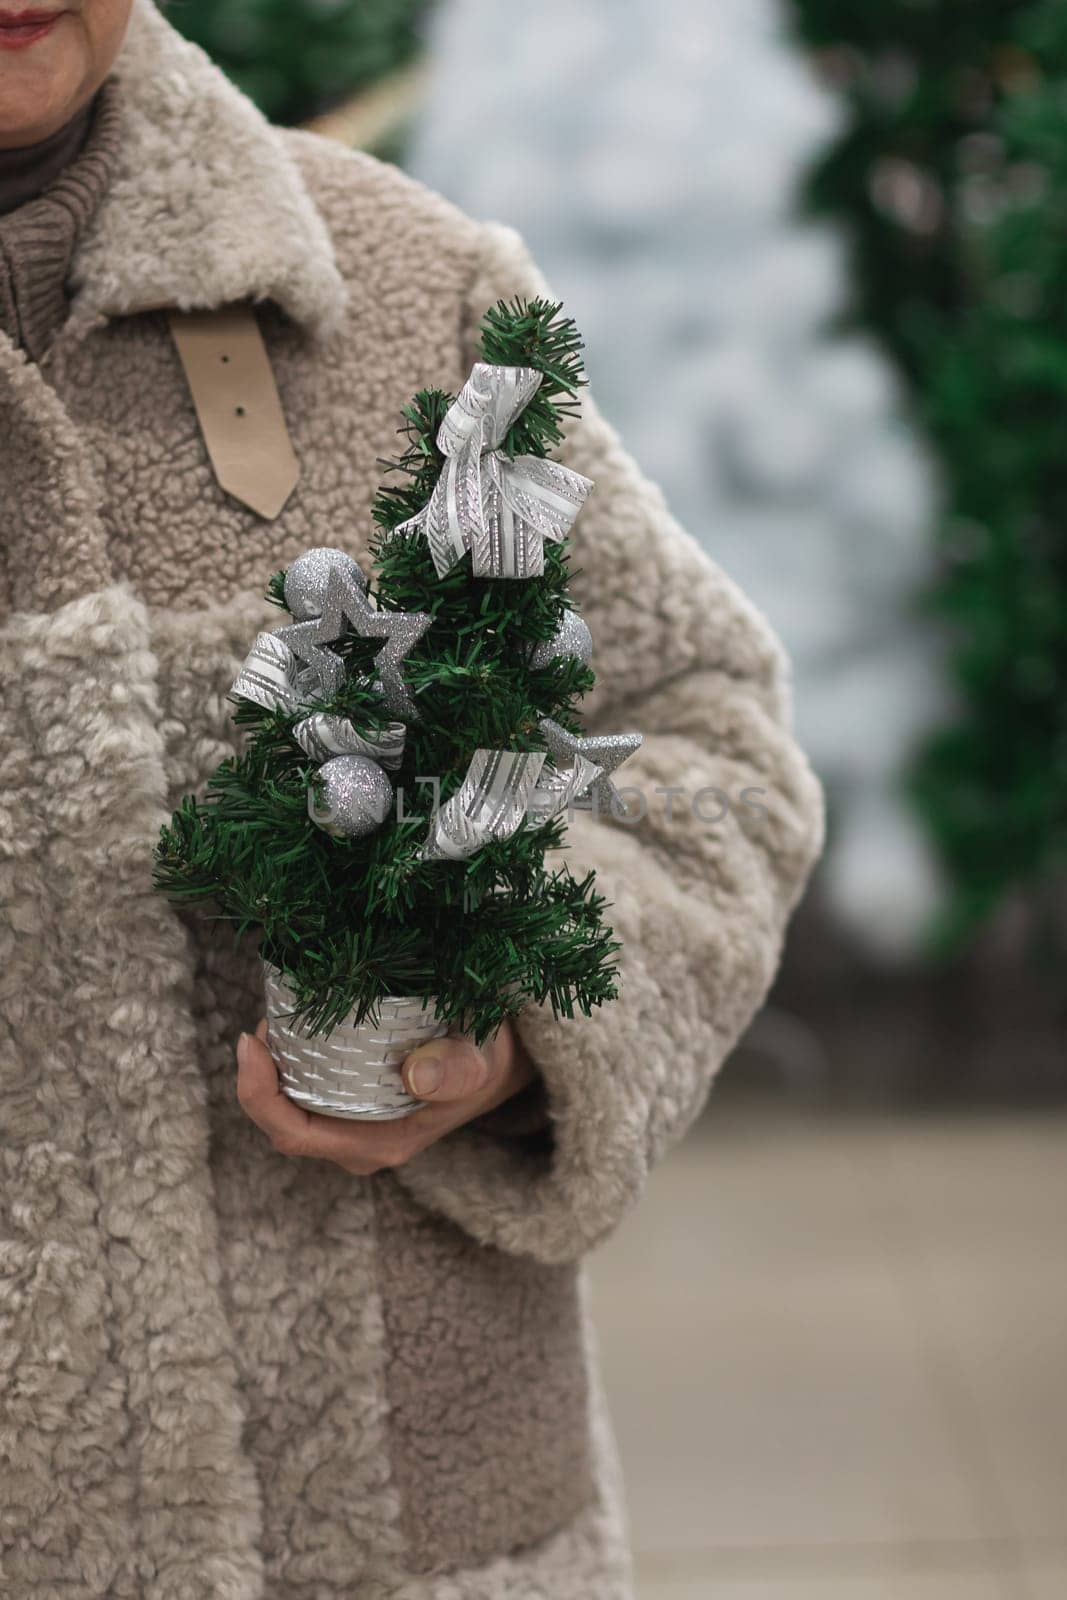 A woman in a fur coat holds a small artificial Christmas tree in her hands